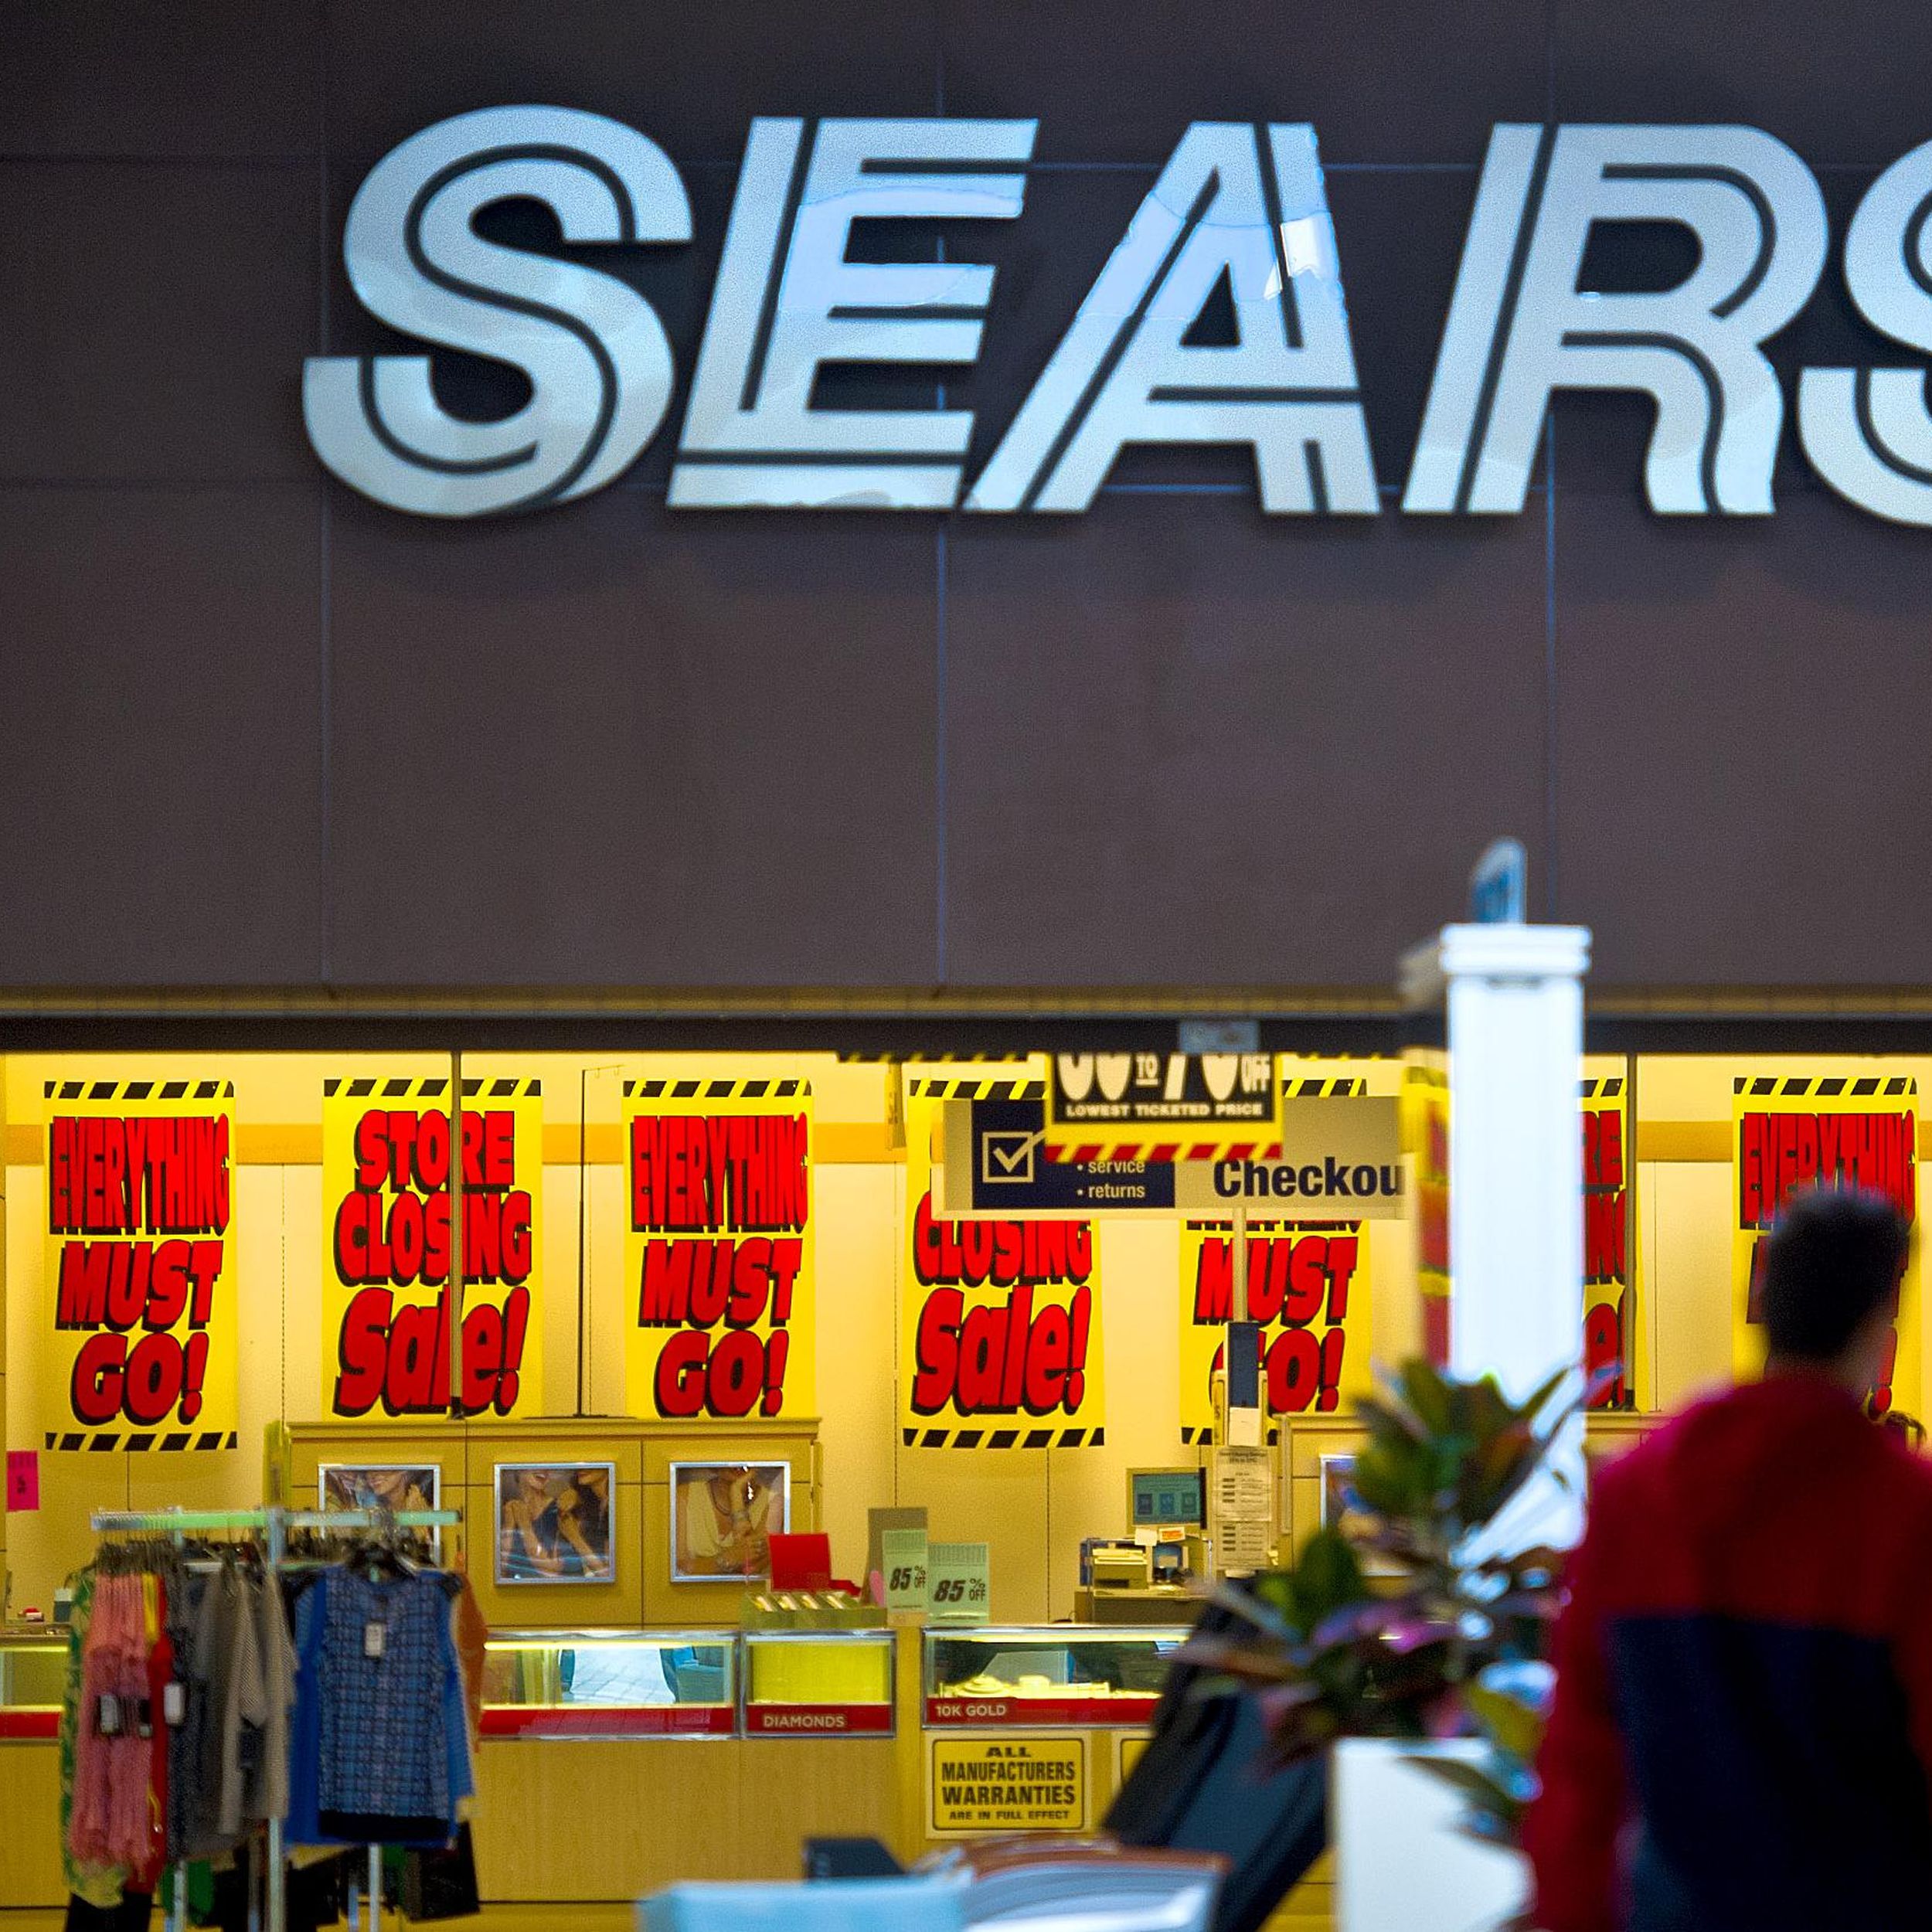 Ross Park Mall could feature theater, fitness center in vacant Sears store